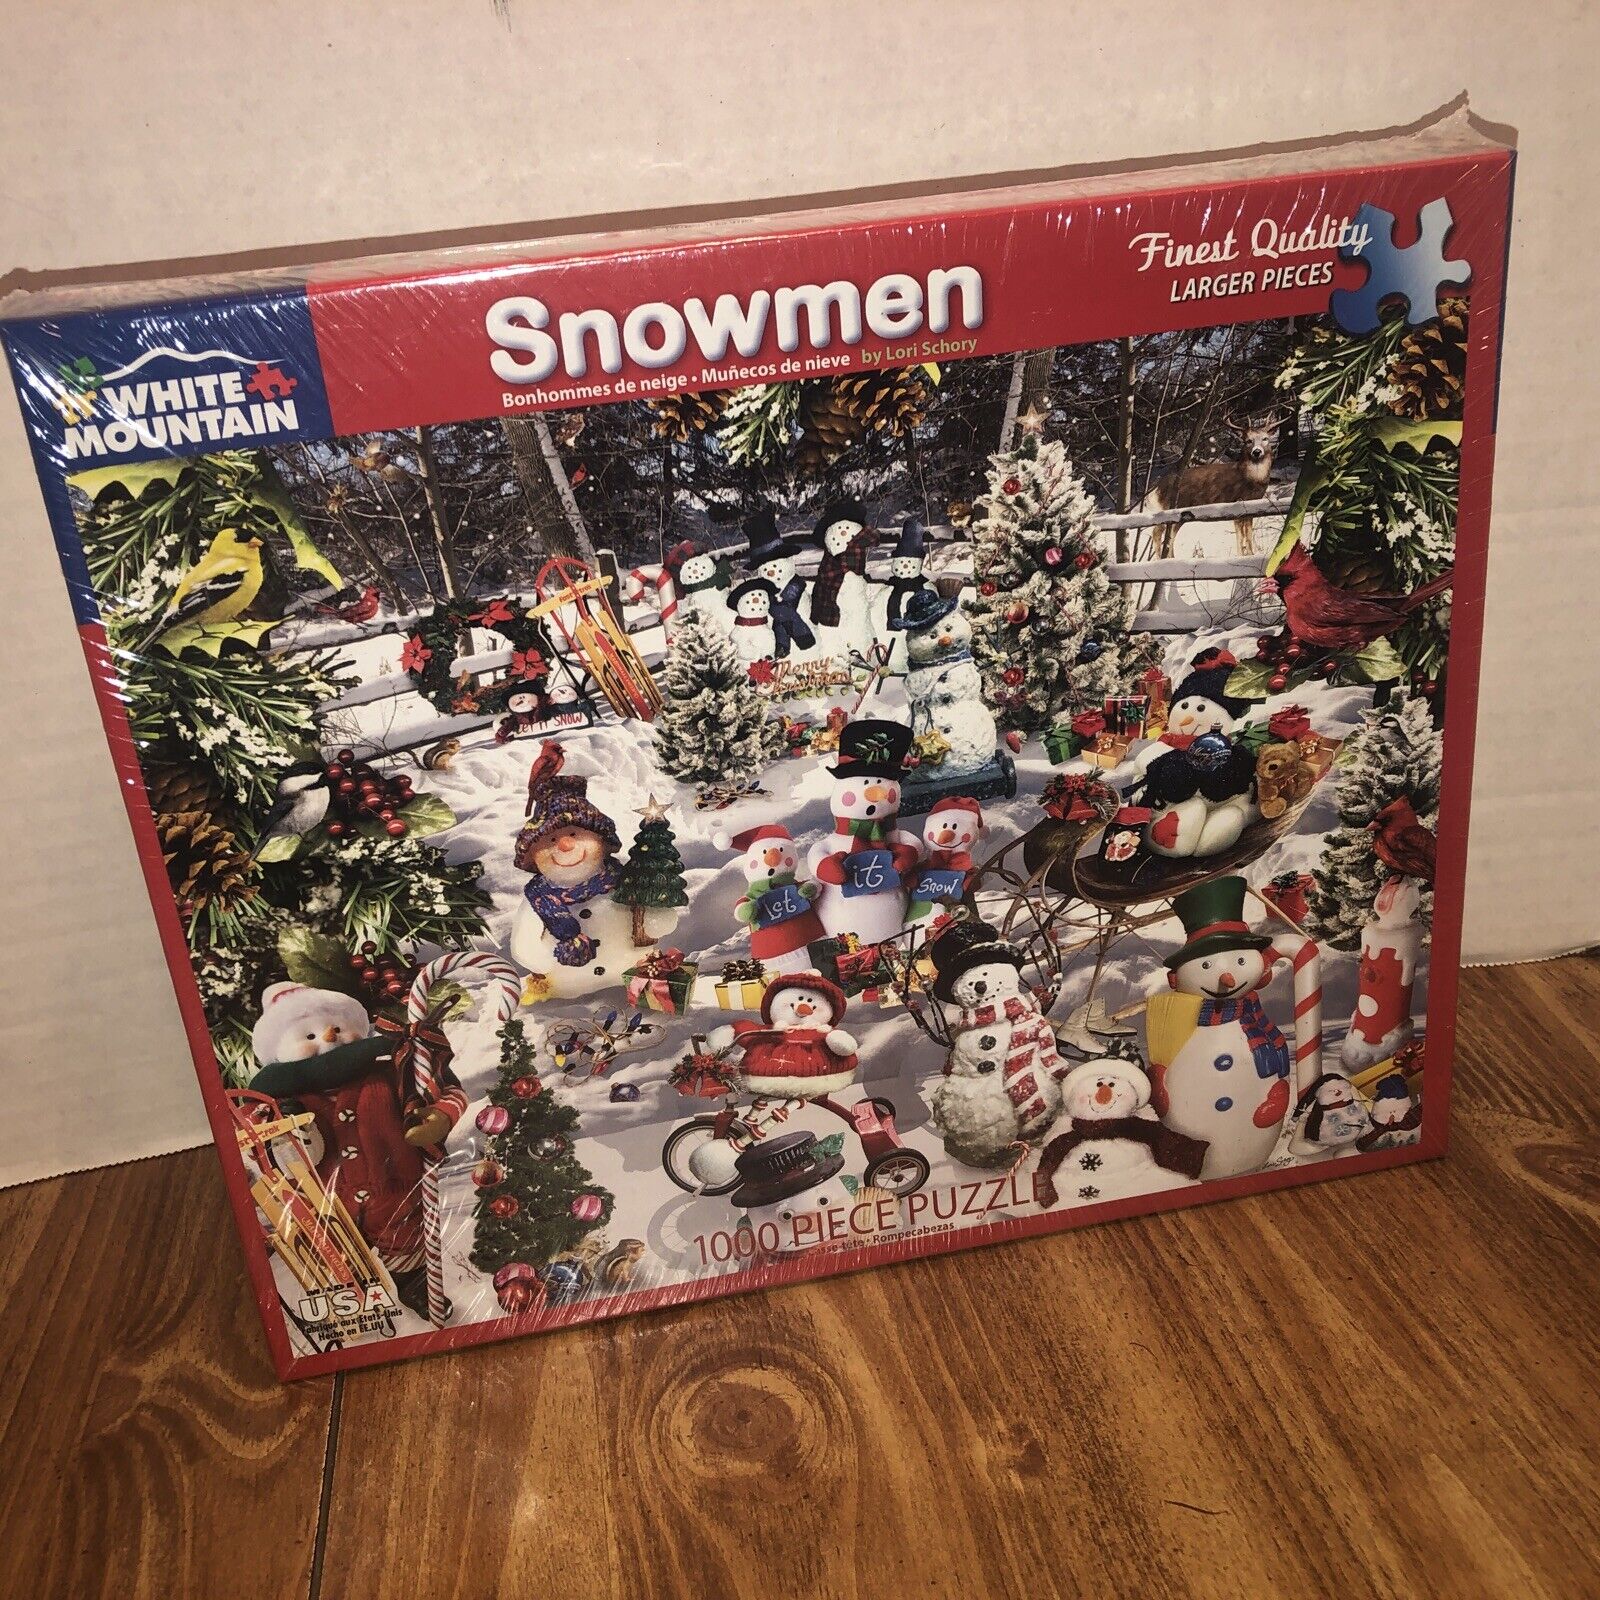 SNOWMEN Denver Mall Popular brand 1000 PIECE JIGSAW PUZZLE MOUNTAIN by NEW SEALED WHITE